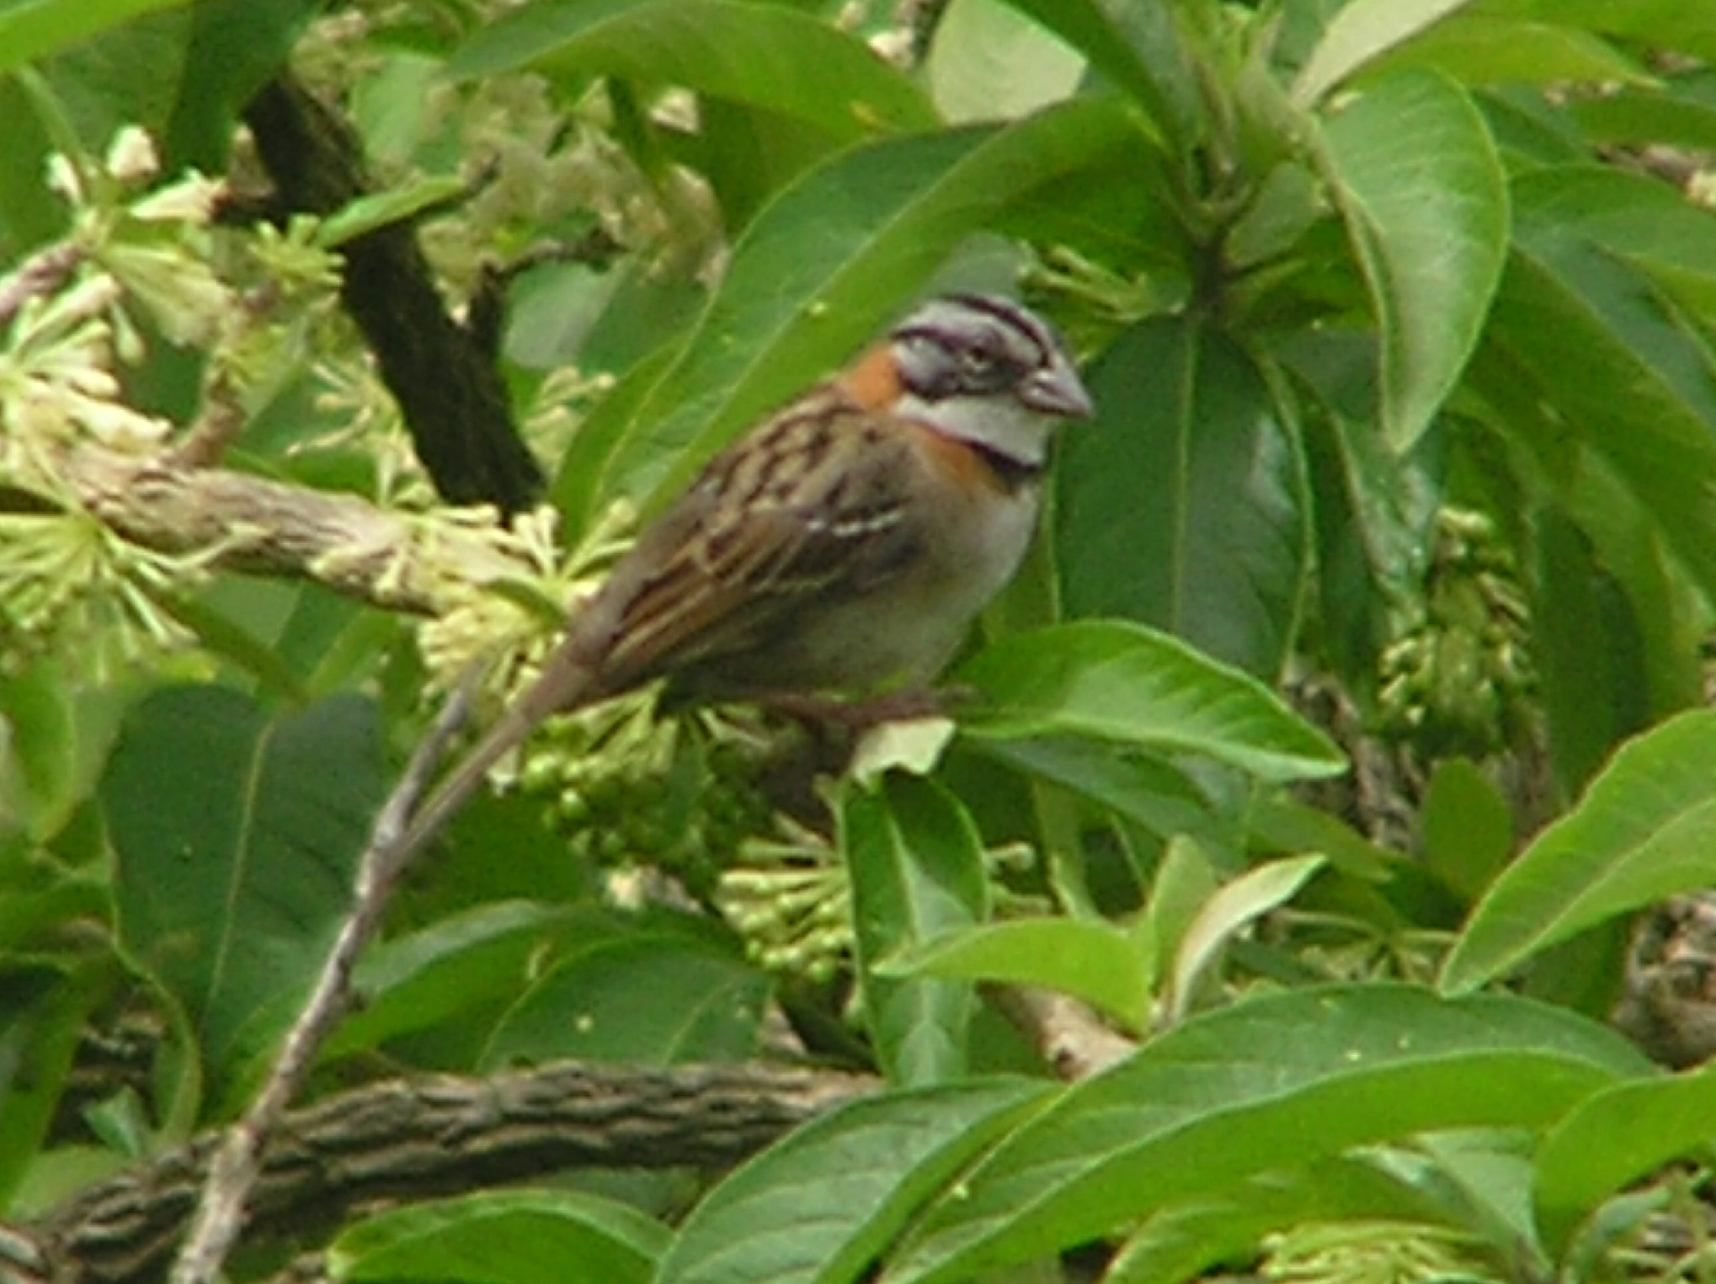 Click picture to see more Rufous-collared Sparrow photos.